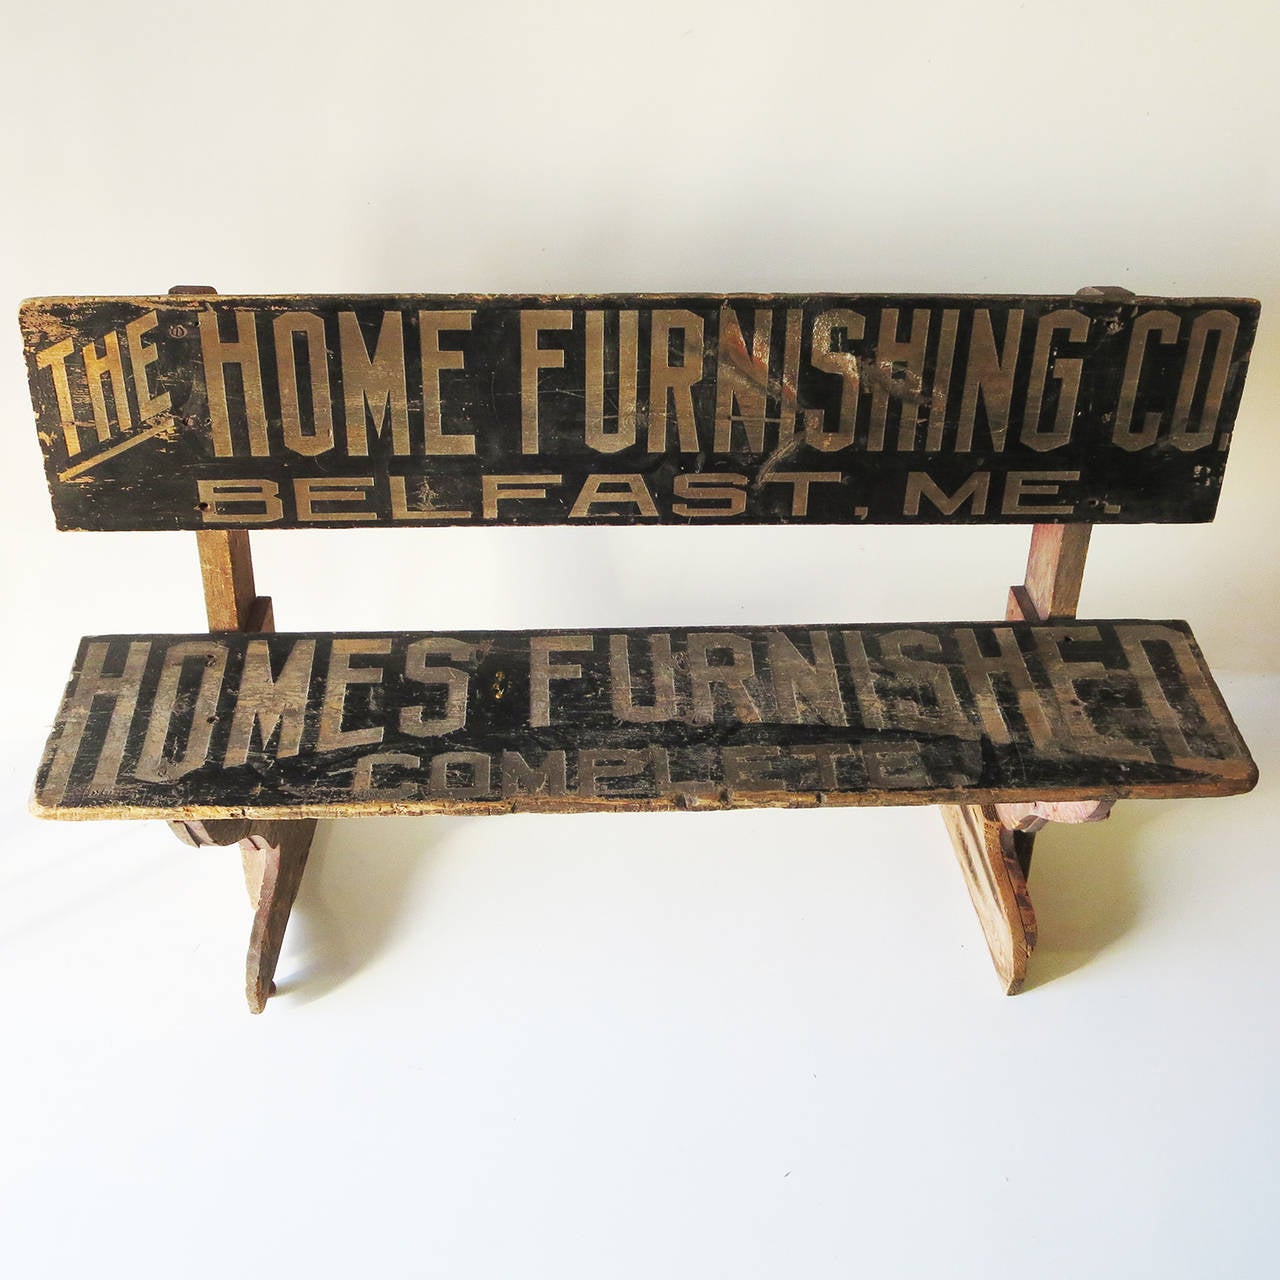 Provided by the Home Furniture Company of Belfast, Maine, this great bench was the ultimate in direct advertising. The seat and bench back are embossed, with lettering all slightly recessed into the wood. The bench is all original, and displays just